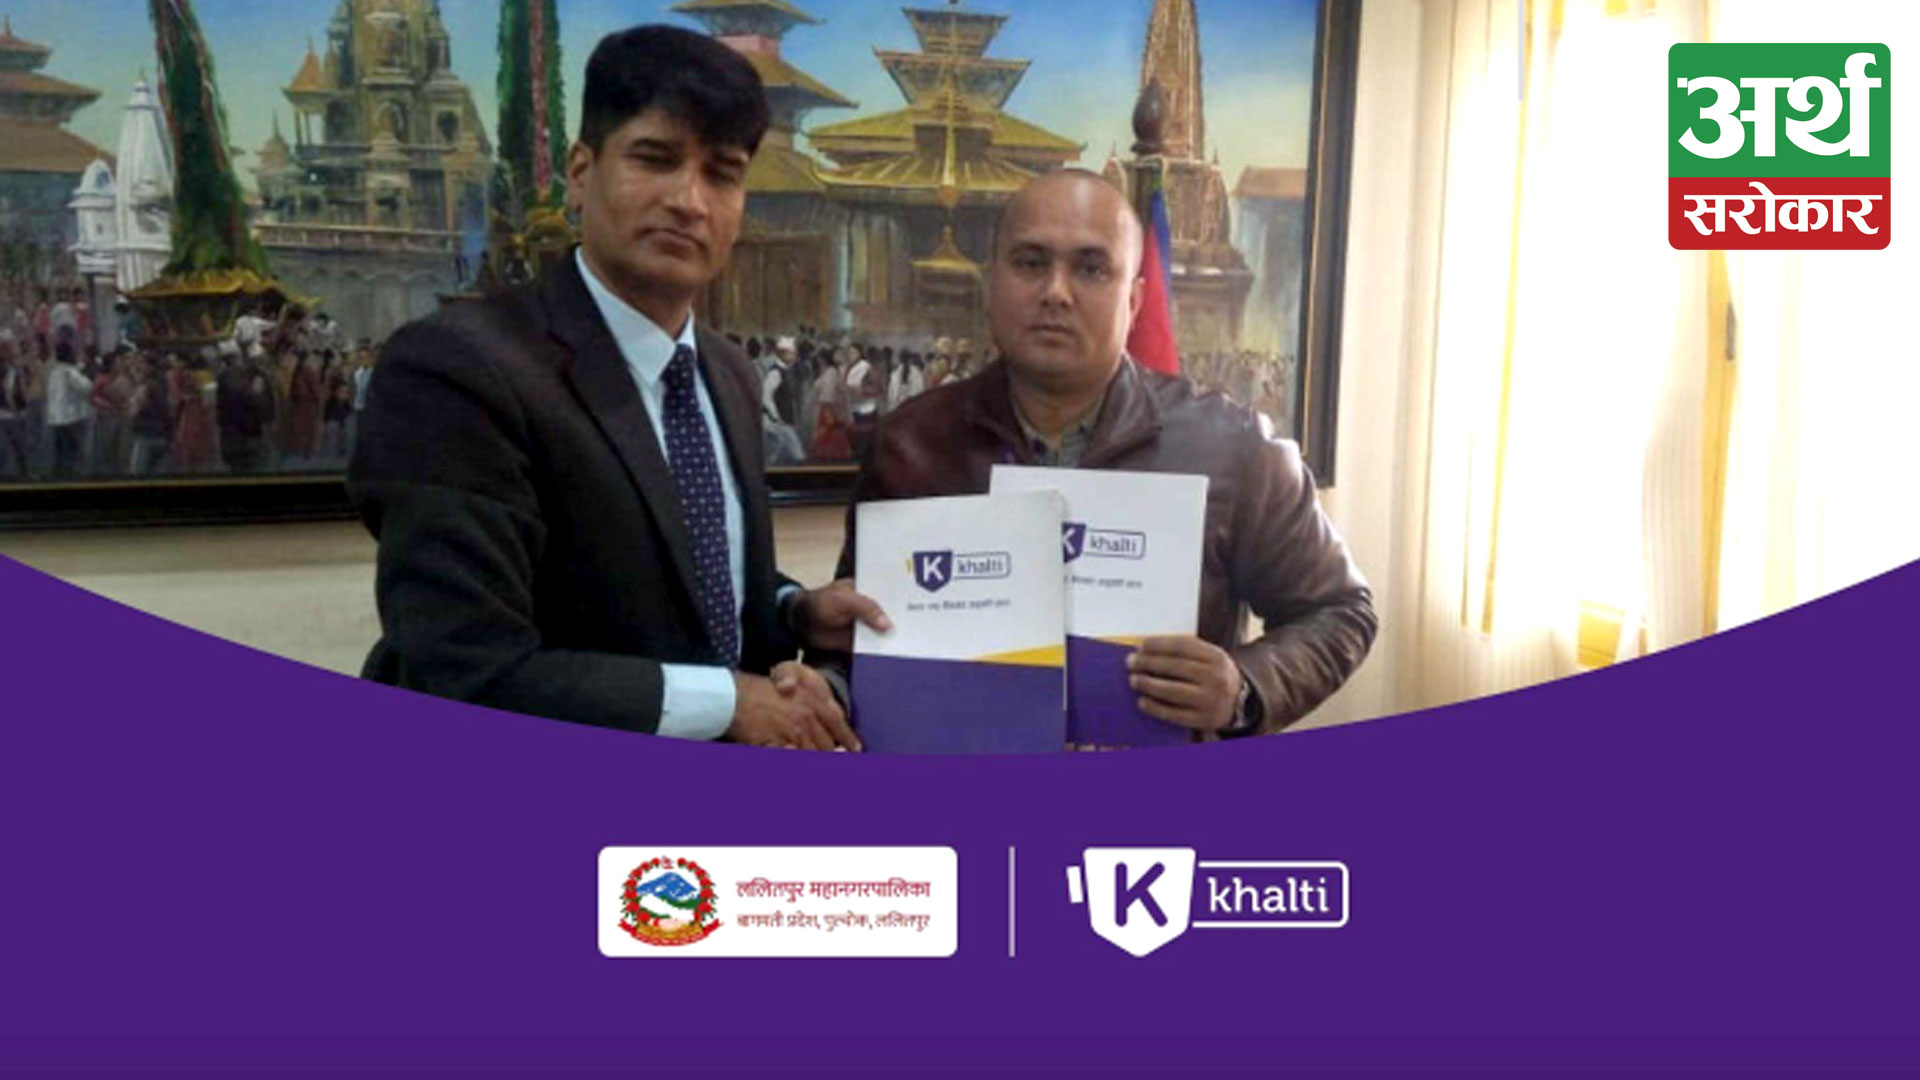 Khalti has partnered with Lalitpur Metropolitan City for the digitization of its revenue collection